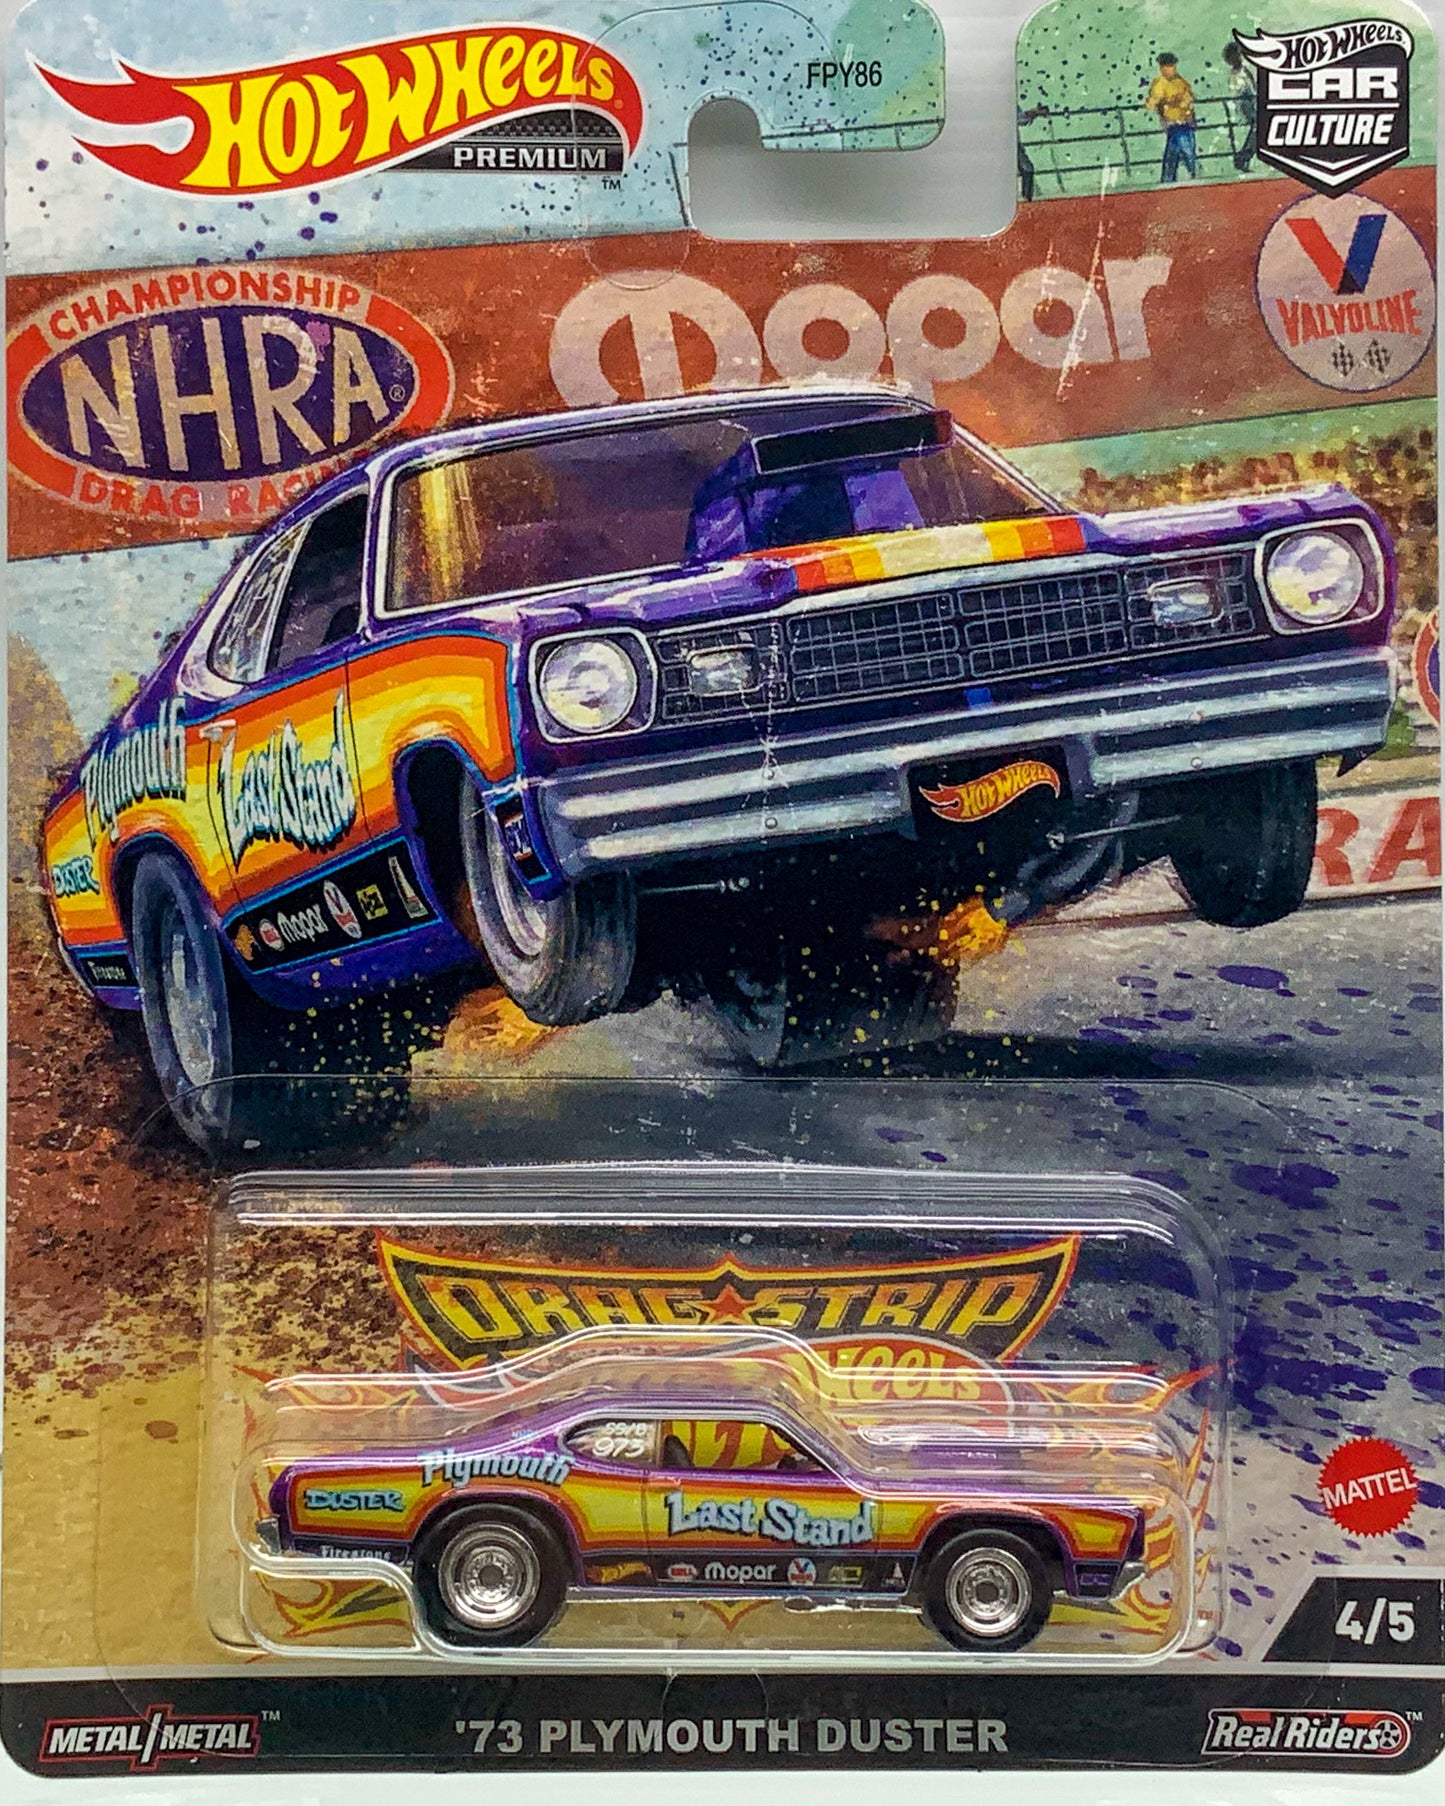 Buy at www.tatoyshop.com Hot Wheels Car Culture  2022 Hot Wheels Car Culture Dragstrip Demons Series '73 Plymouth Duster 4/5  Number 4 from the set of 5 Dragstrip Demons Series Premium Real Riders Metal Mattel FPY86 Shop Now   Mr Toys Kmart Target Big W  International and Domestic delivery by Auspost 